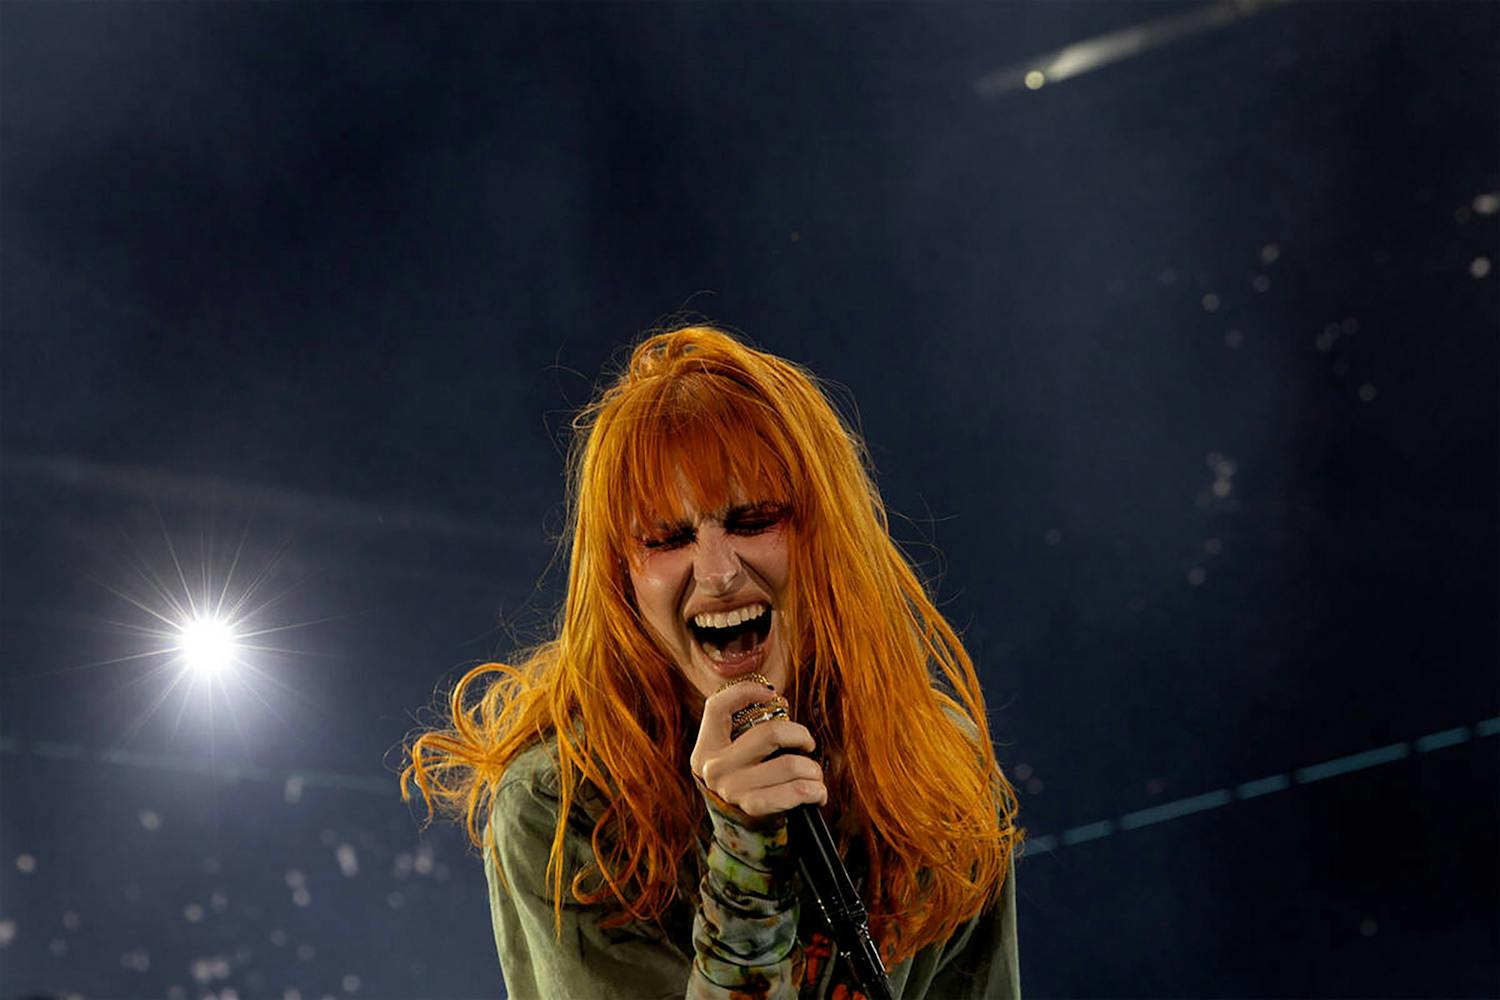 Paramore's lead singer, Hayley Williams, performs at the When We Were Young music festival at the Las Vegas Festival Grounds on Oct. 23, 2022. The October performance generated excitement in fans at the idea of new music coming from the group in the future.